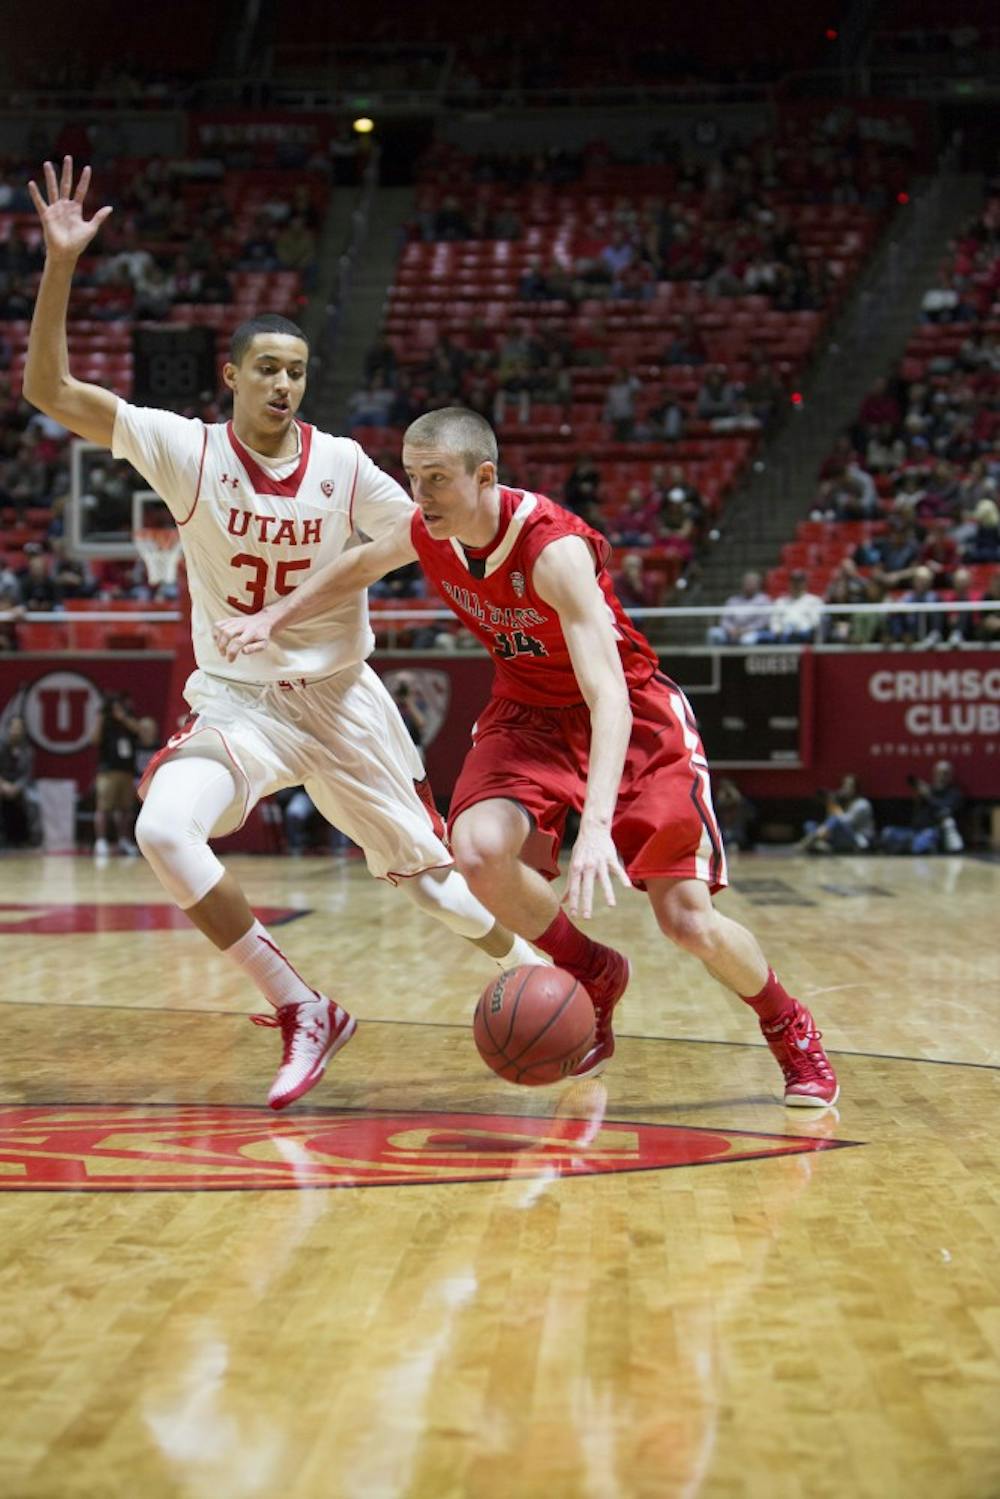 Freshman forward Sean Sellers drives the ball down the court during the game against Utah on Nov. 14 at the Jon M. Huntsman Center. Ball State lost 90-72. Chris Ayers | The Daily Utah Chronicle